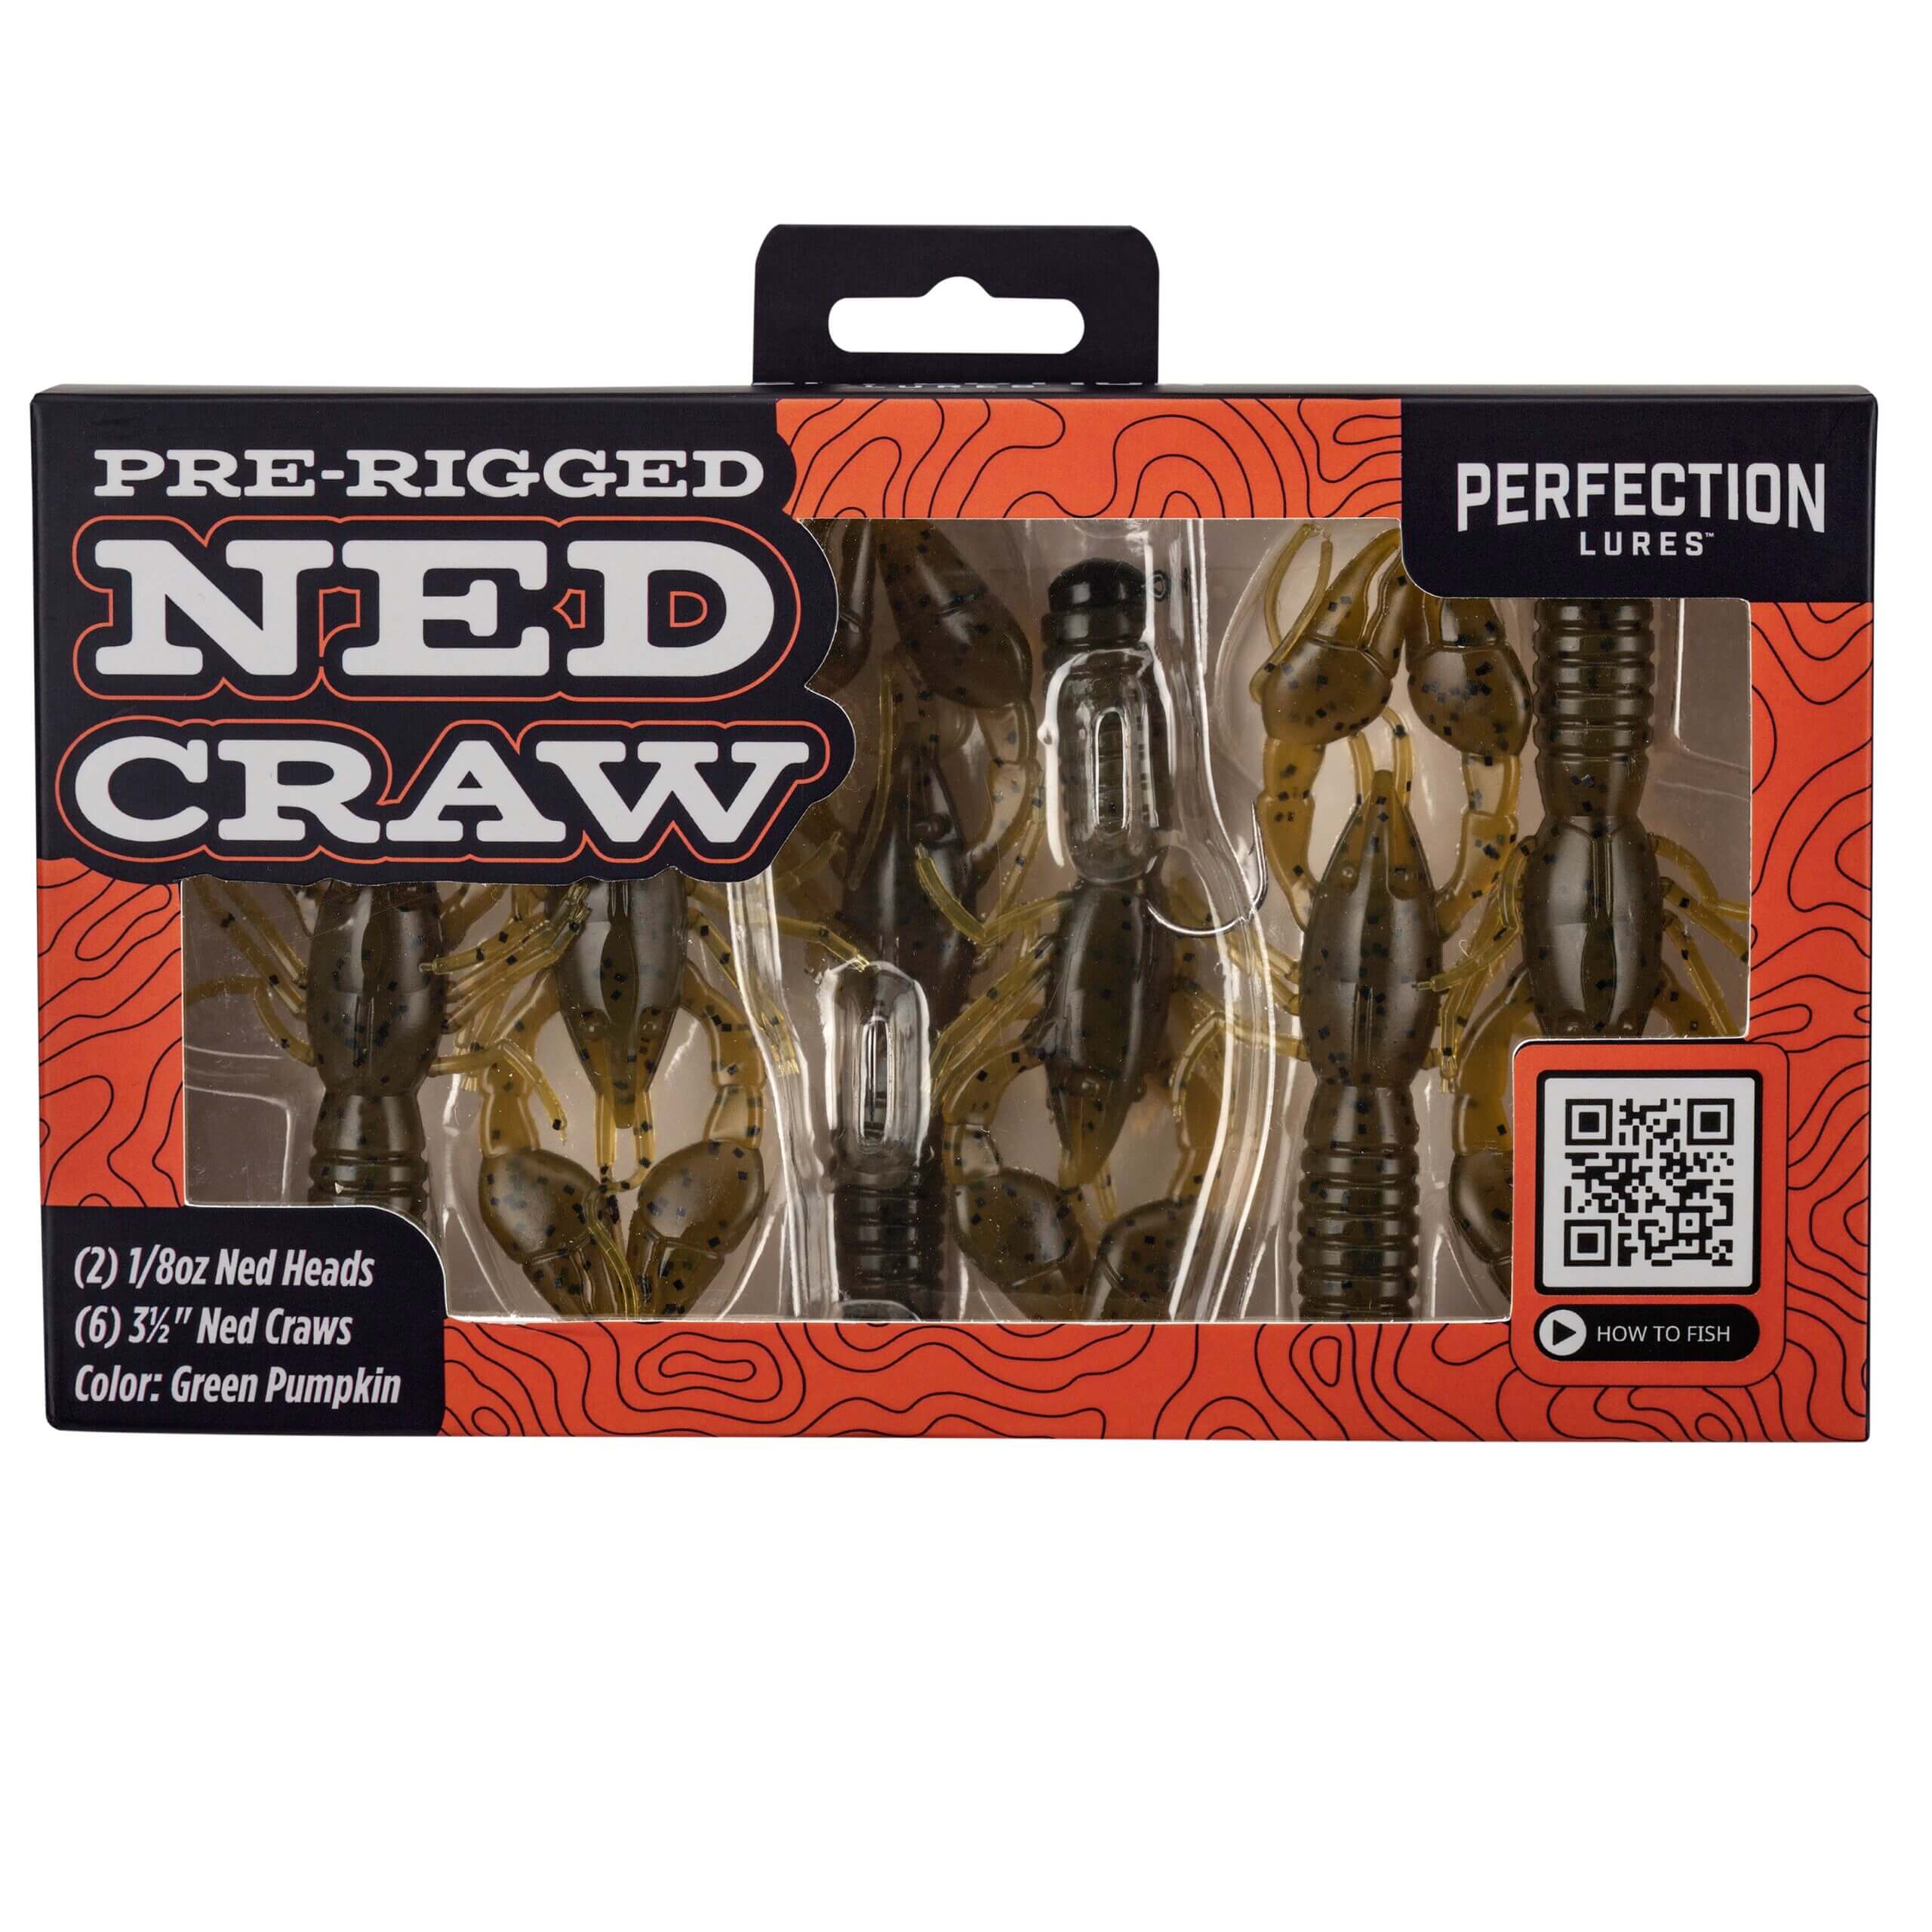 Perfection Lures Dudley's Pre-Rigged Ned Rig Kit Bass Bait - 2 Pack Bundle